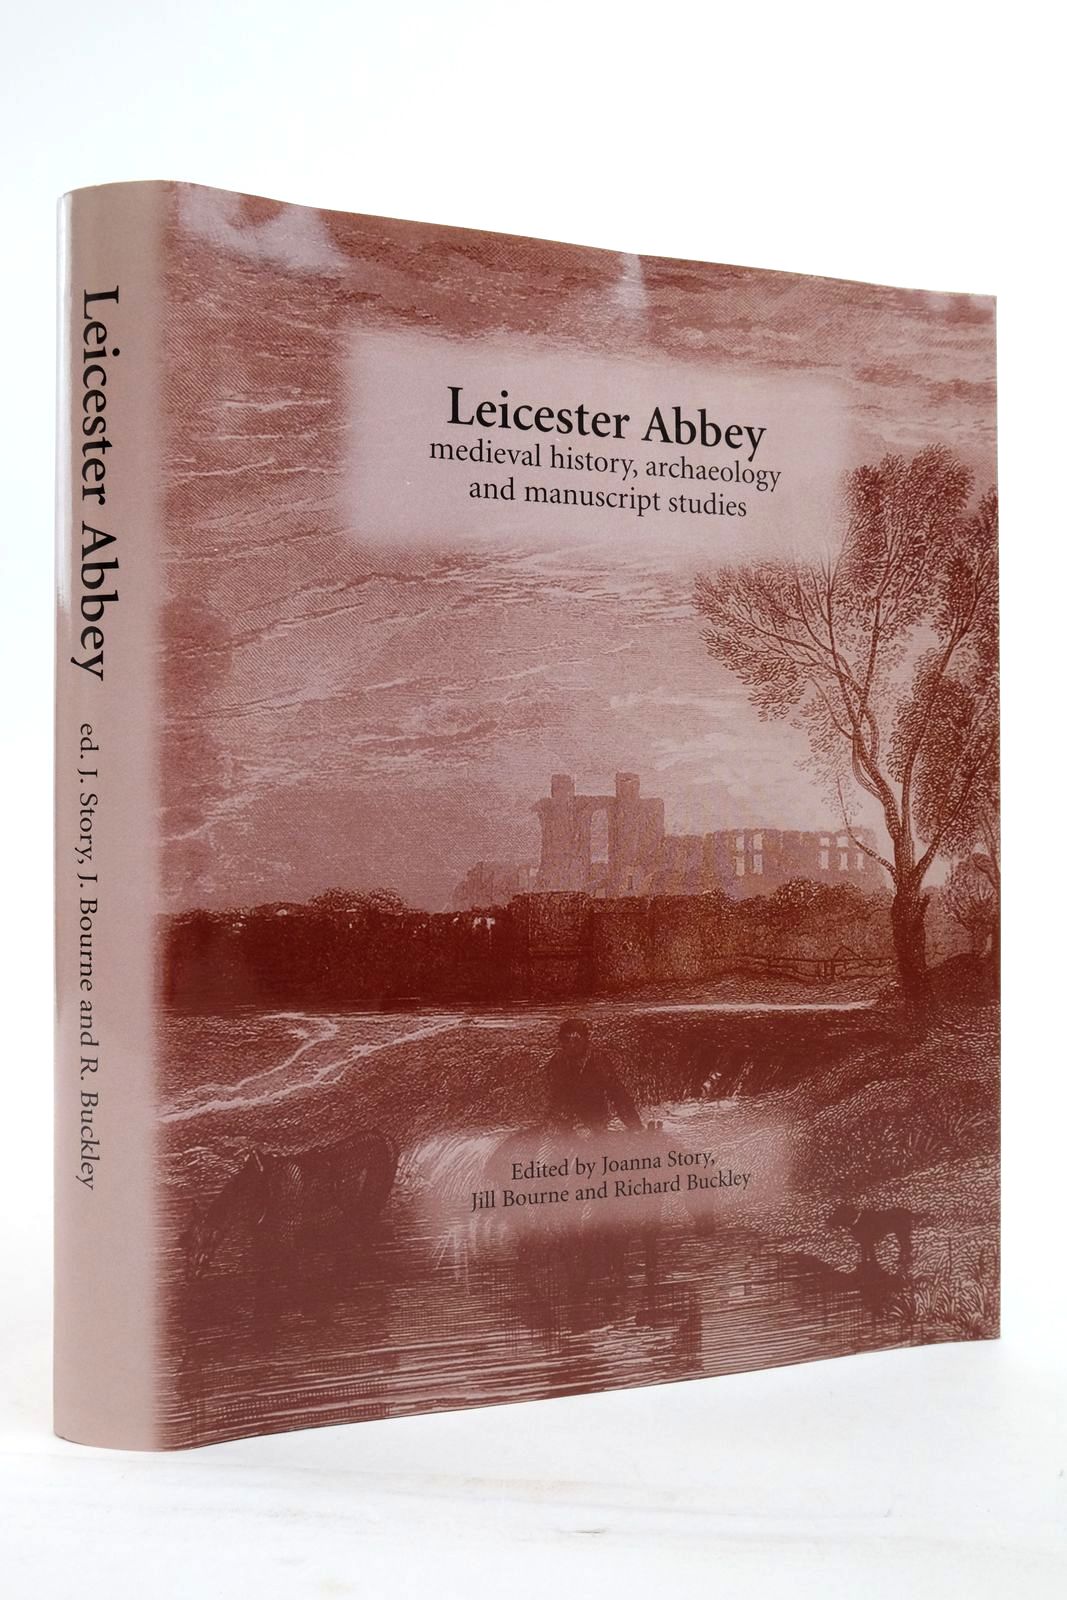 Photo of LEICESTER ABBEY: MEDIEVAL HISTORY, ARCHAEOLOGY AND MANUSCRIPT STUDIES- Stock Number: 2136584